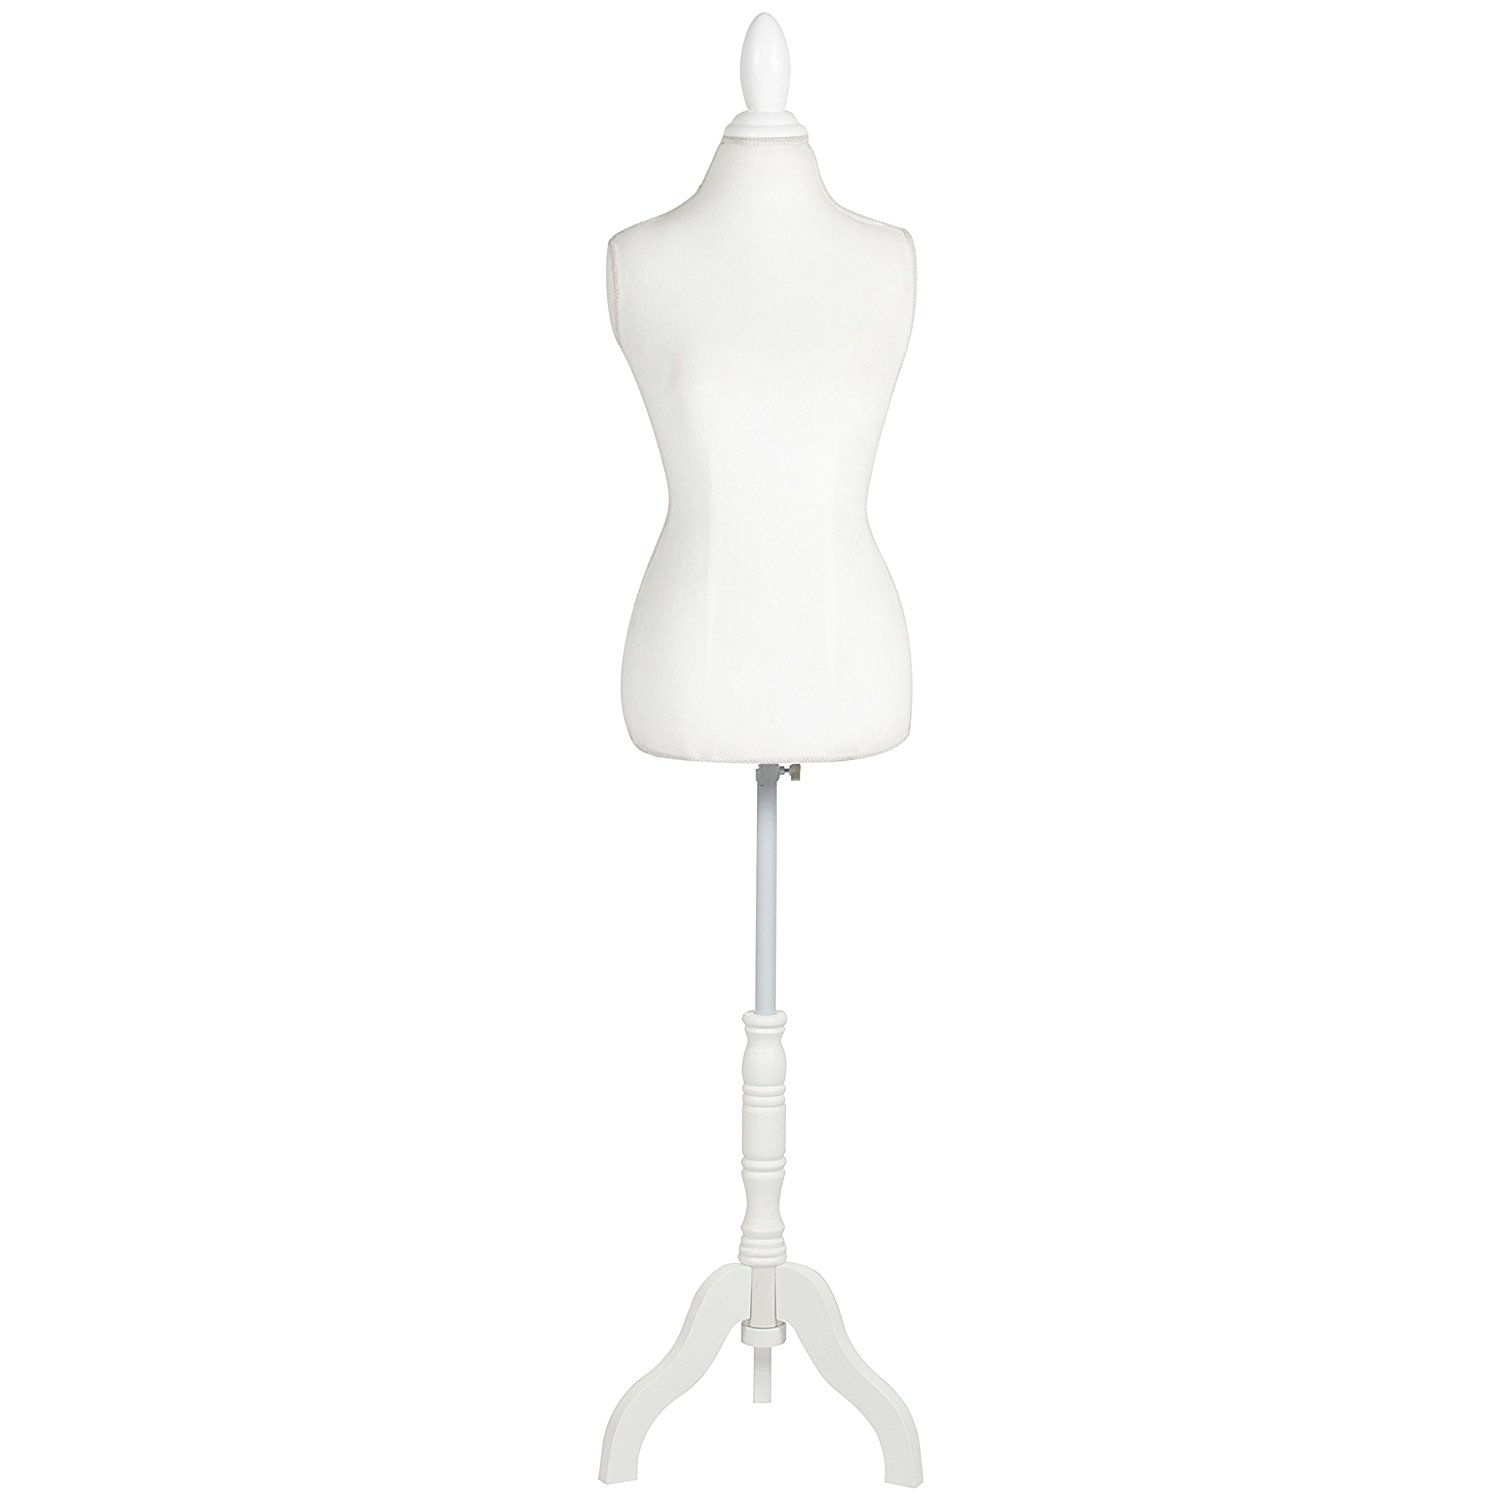 Amazon.com: Best Choice Products Female Mannequin Torso Display w ...